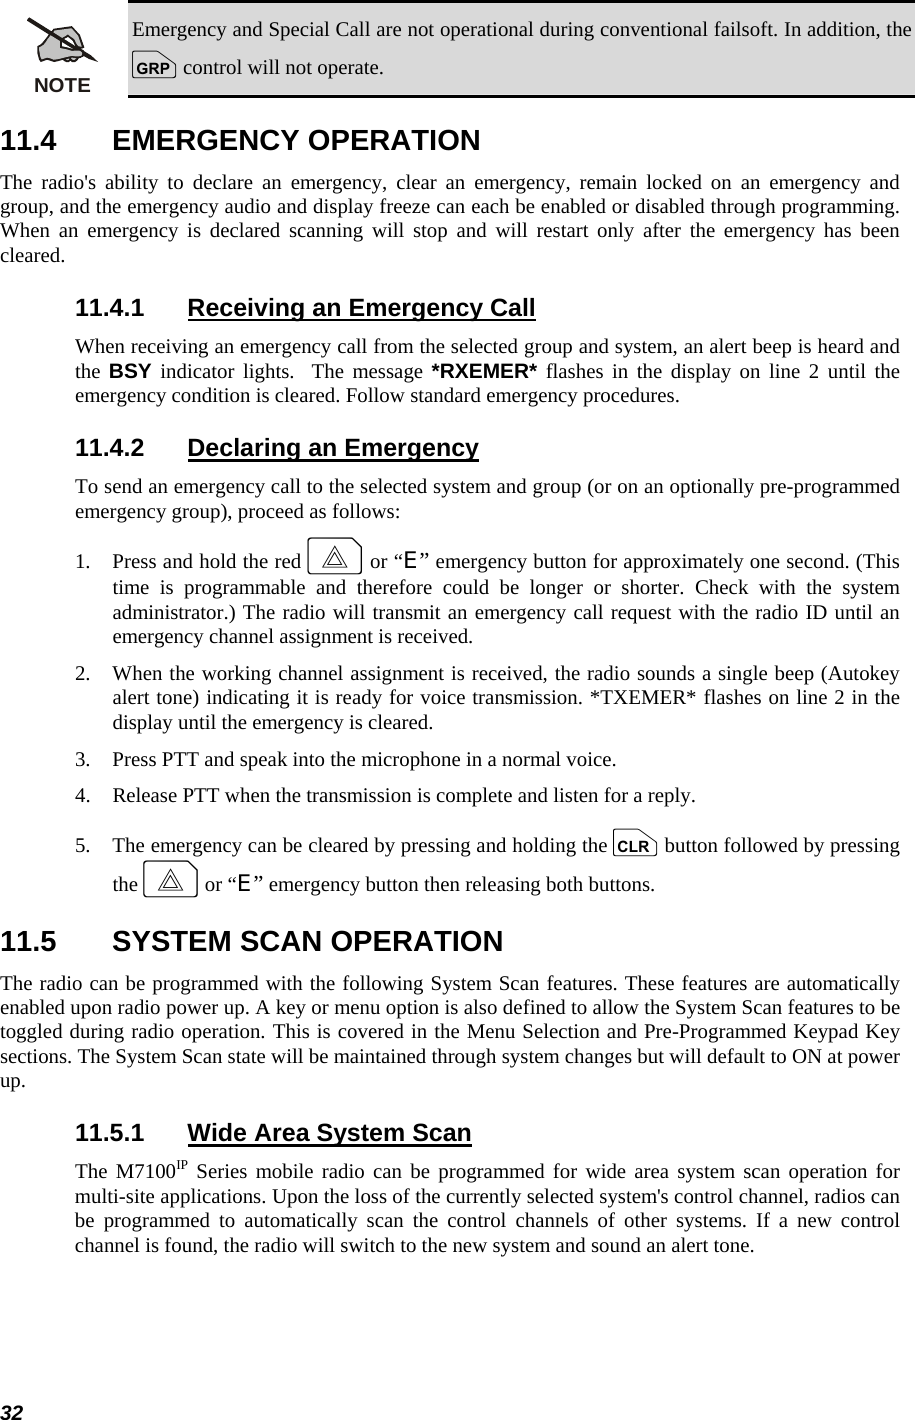  32 NOTE Emergency and Special Call are not operational during conventional failsoft. In addition, the g control will not operate. 11.4 EMERGENCY OPERATION The radio&apos;s ability to declare an emergency, clear an emergency, remain locked on an emergency and group, and the emergency audio and display freeze can each be enabled or disabled through programming. When an emergency is declared scanning will stop and will restart only after the emergency has been cleared. 11.4.1  Receiving an Emergency Call When receiving an emergency call from the selected group and system, an alert beep is heard and the  BSY indicator lights.  The message *RXEMER* flashes in the display on line 2 until the emergency condition is cleared. Follow standard emergency procedures. 11.4.2  Declaring an Emergency To send an emergency call to the selected system and group (or on an optionally pre-programmed emergency group), proceed as follows: 1.   Press and hold the red E or “E” emergency button for approximately one second. (This time is programmable and therefore could be longer or shorter. Check with the system administrator.) The radio will transmit an emergency call request with the radio ID until an emergency channel assignment is received. 2.   When the working channel assignment is received, the radio sounds a single beep (Autokey alert tone) indicating it is ready for voice transmission. *TXEMER* flashes on line 2 in the display until the emergency is cleared. 3.   Press PTT and speak into the microphone in a normal voice. 4.   Release PTT when the transmission is complete and listen for a reply. 5.   The emergency can be cleared by pressing and holding the c button followed by pressing the E or “E” emergency button then releasing both buttons. 11.5  SYSTEM SCAN OPERATION The radio can be programmed with the following System Scan features. These features are automatically enabled upon radio power up. A key or menu option is also defined to allow the System Scan features to be toggled during radio operation. This is covered in the Menu Selection and Pre-Programmed Keypad Key sections. The System Scan state will be maintained through system changes but will default to ON at power up. 11.5.1  Wide Area System Scan The M7100IP Series mobile radio can be programmed for wide area system scan operation for multi-site applications. Upon the loss of the currently selected system&apos;s control channel, radios can be programmed to automatically scan the control channels of other systems. If a new control channel is found, the radio will switch to the new system and sound an alert tone. 